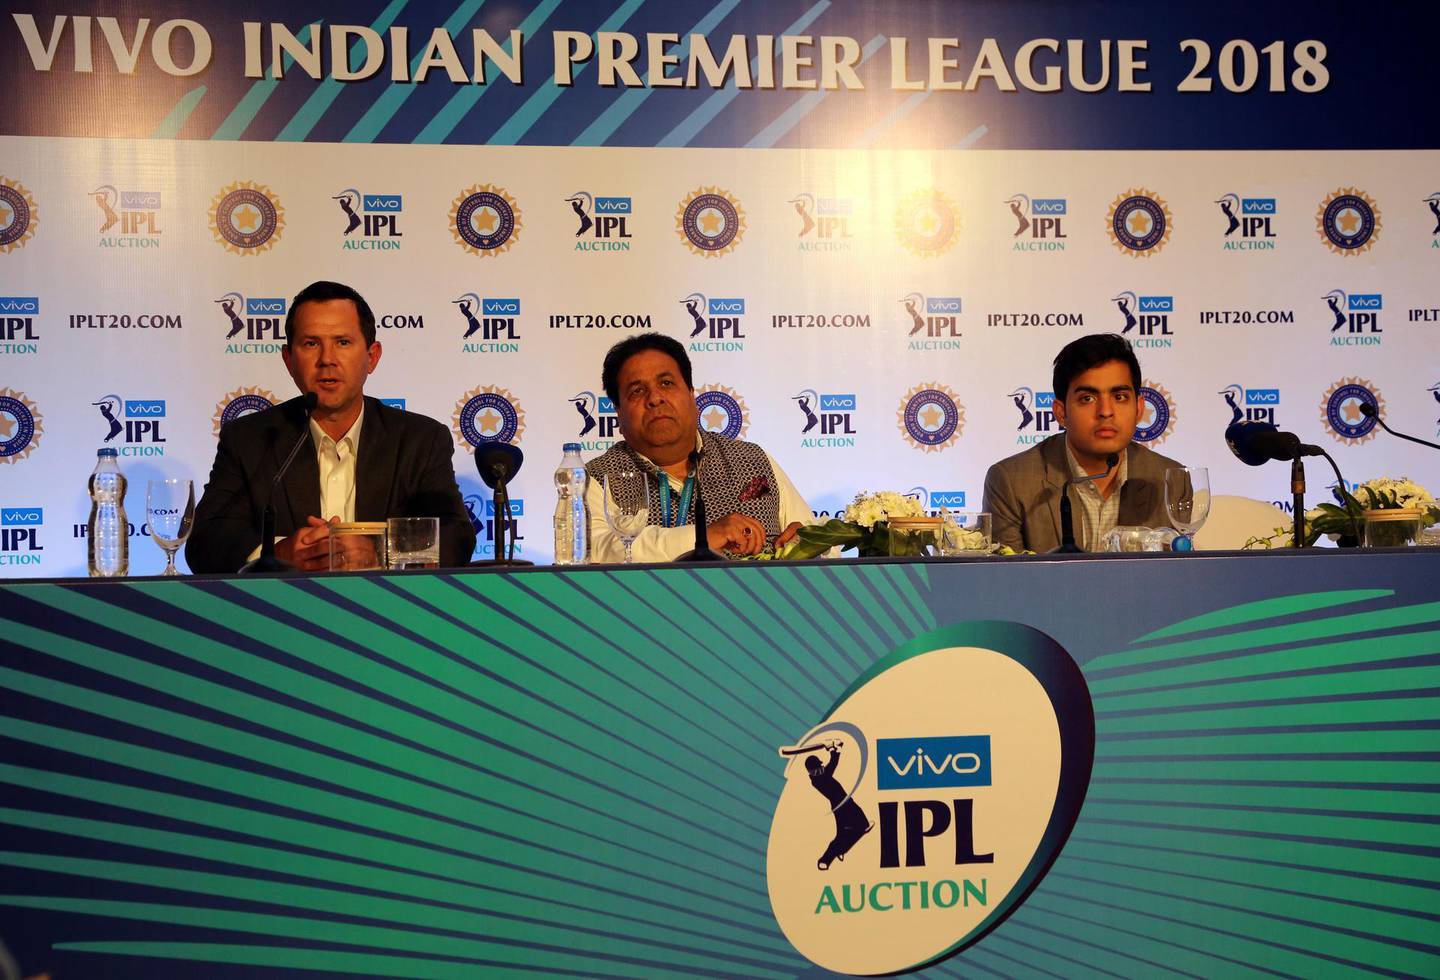 Former Australian cricketer and Delhi Daredevils team coach Ricky Ponting, left, IPL Chairman Rajeev Shukla, center, and Mumbai Indians' team owner Akash Ambani attend a press conference on the first day of the Indian Premier League (IPL) player auction in Bangalore, India, Saturday, Jan. 27, 2018. The IPL auctions are being held in Bangalore for the eleventh edition of the domestic Twenty20 cricket tournament, which will be held at different venues across the country with eight teams participating. (AP Photo/Aijaz Rahi)